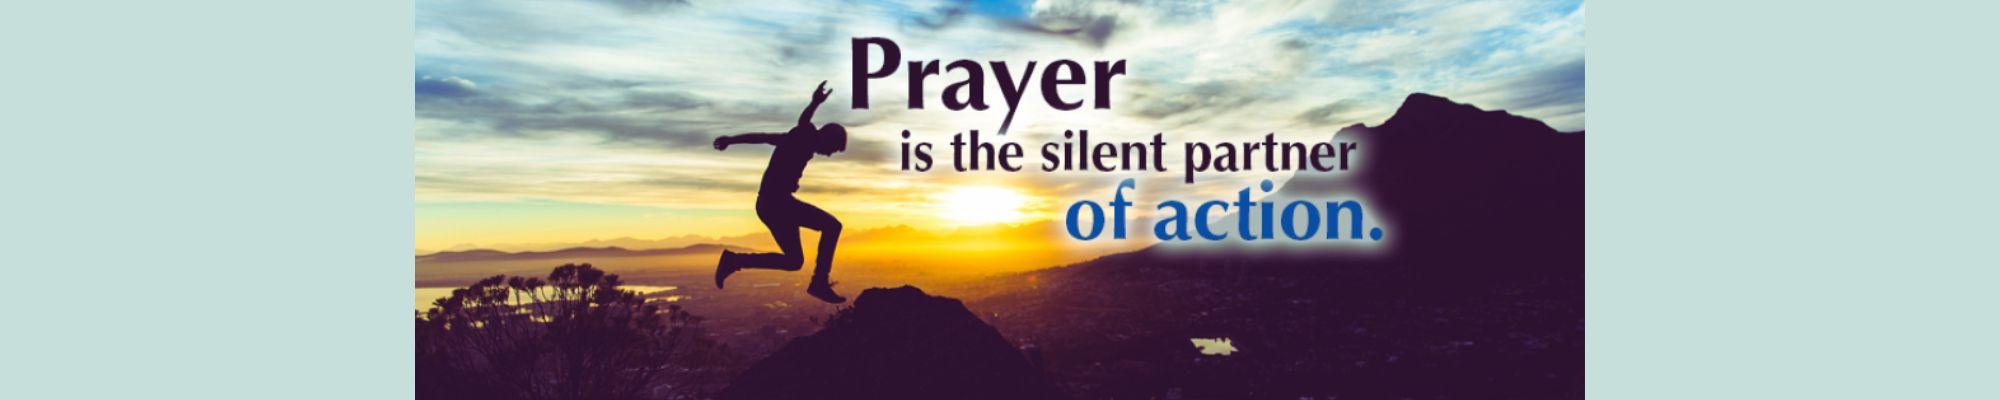 Prayer is the silent partner of action